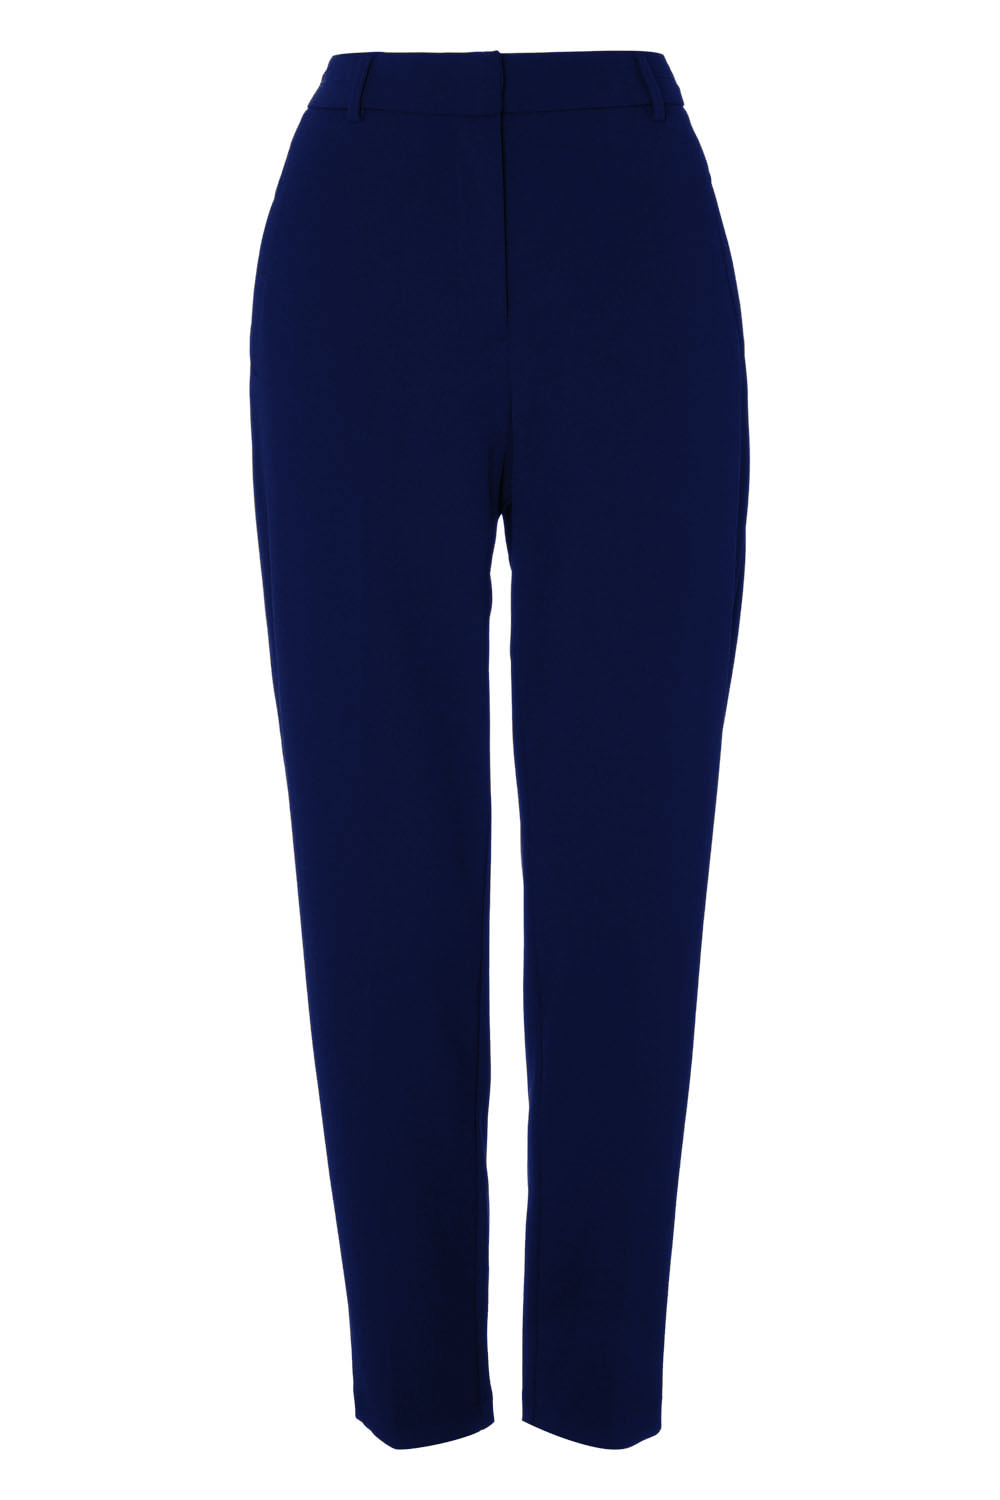 Navy  Long Straight Leg Stretch Trouser, Image 3 of 3